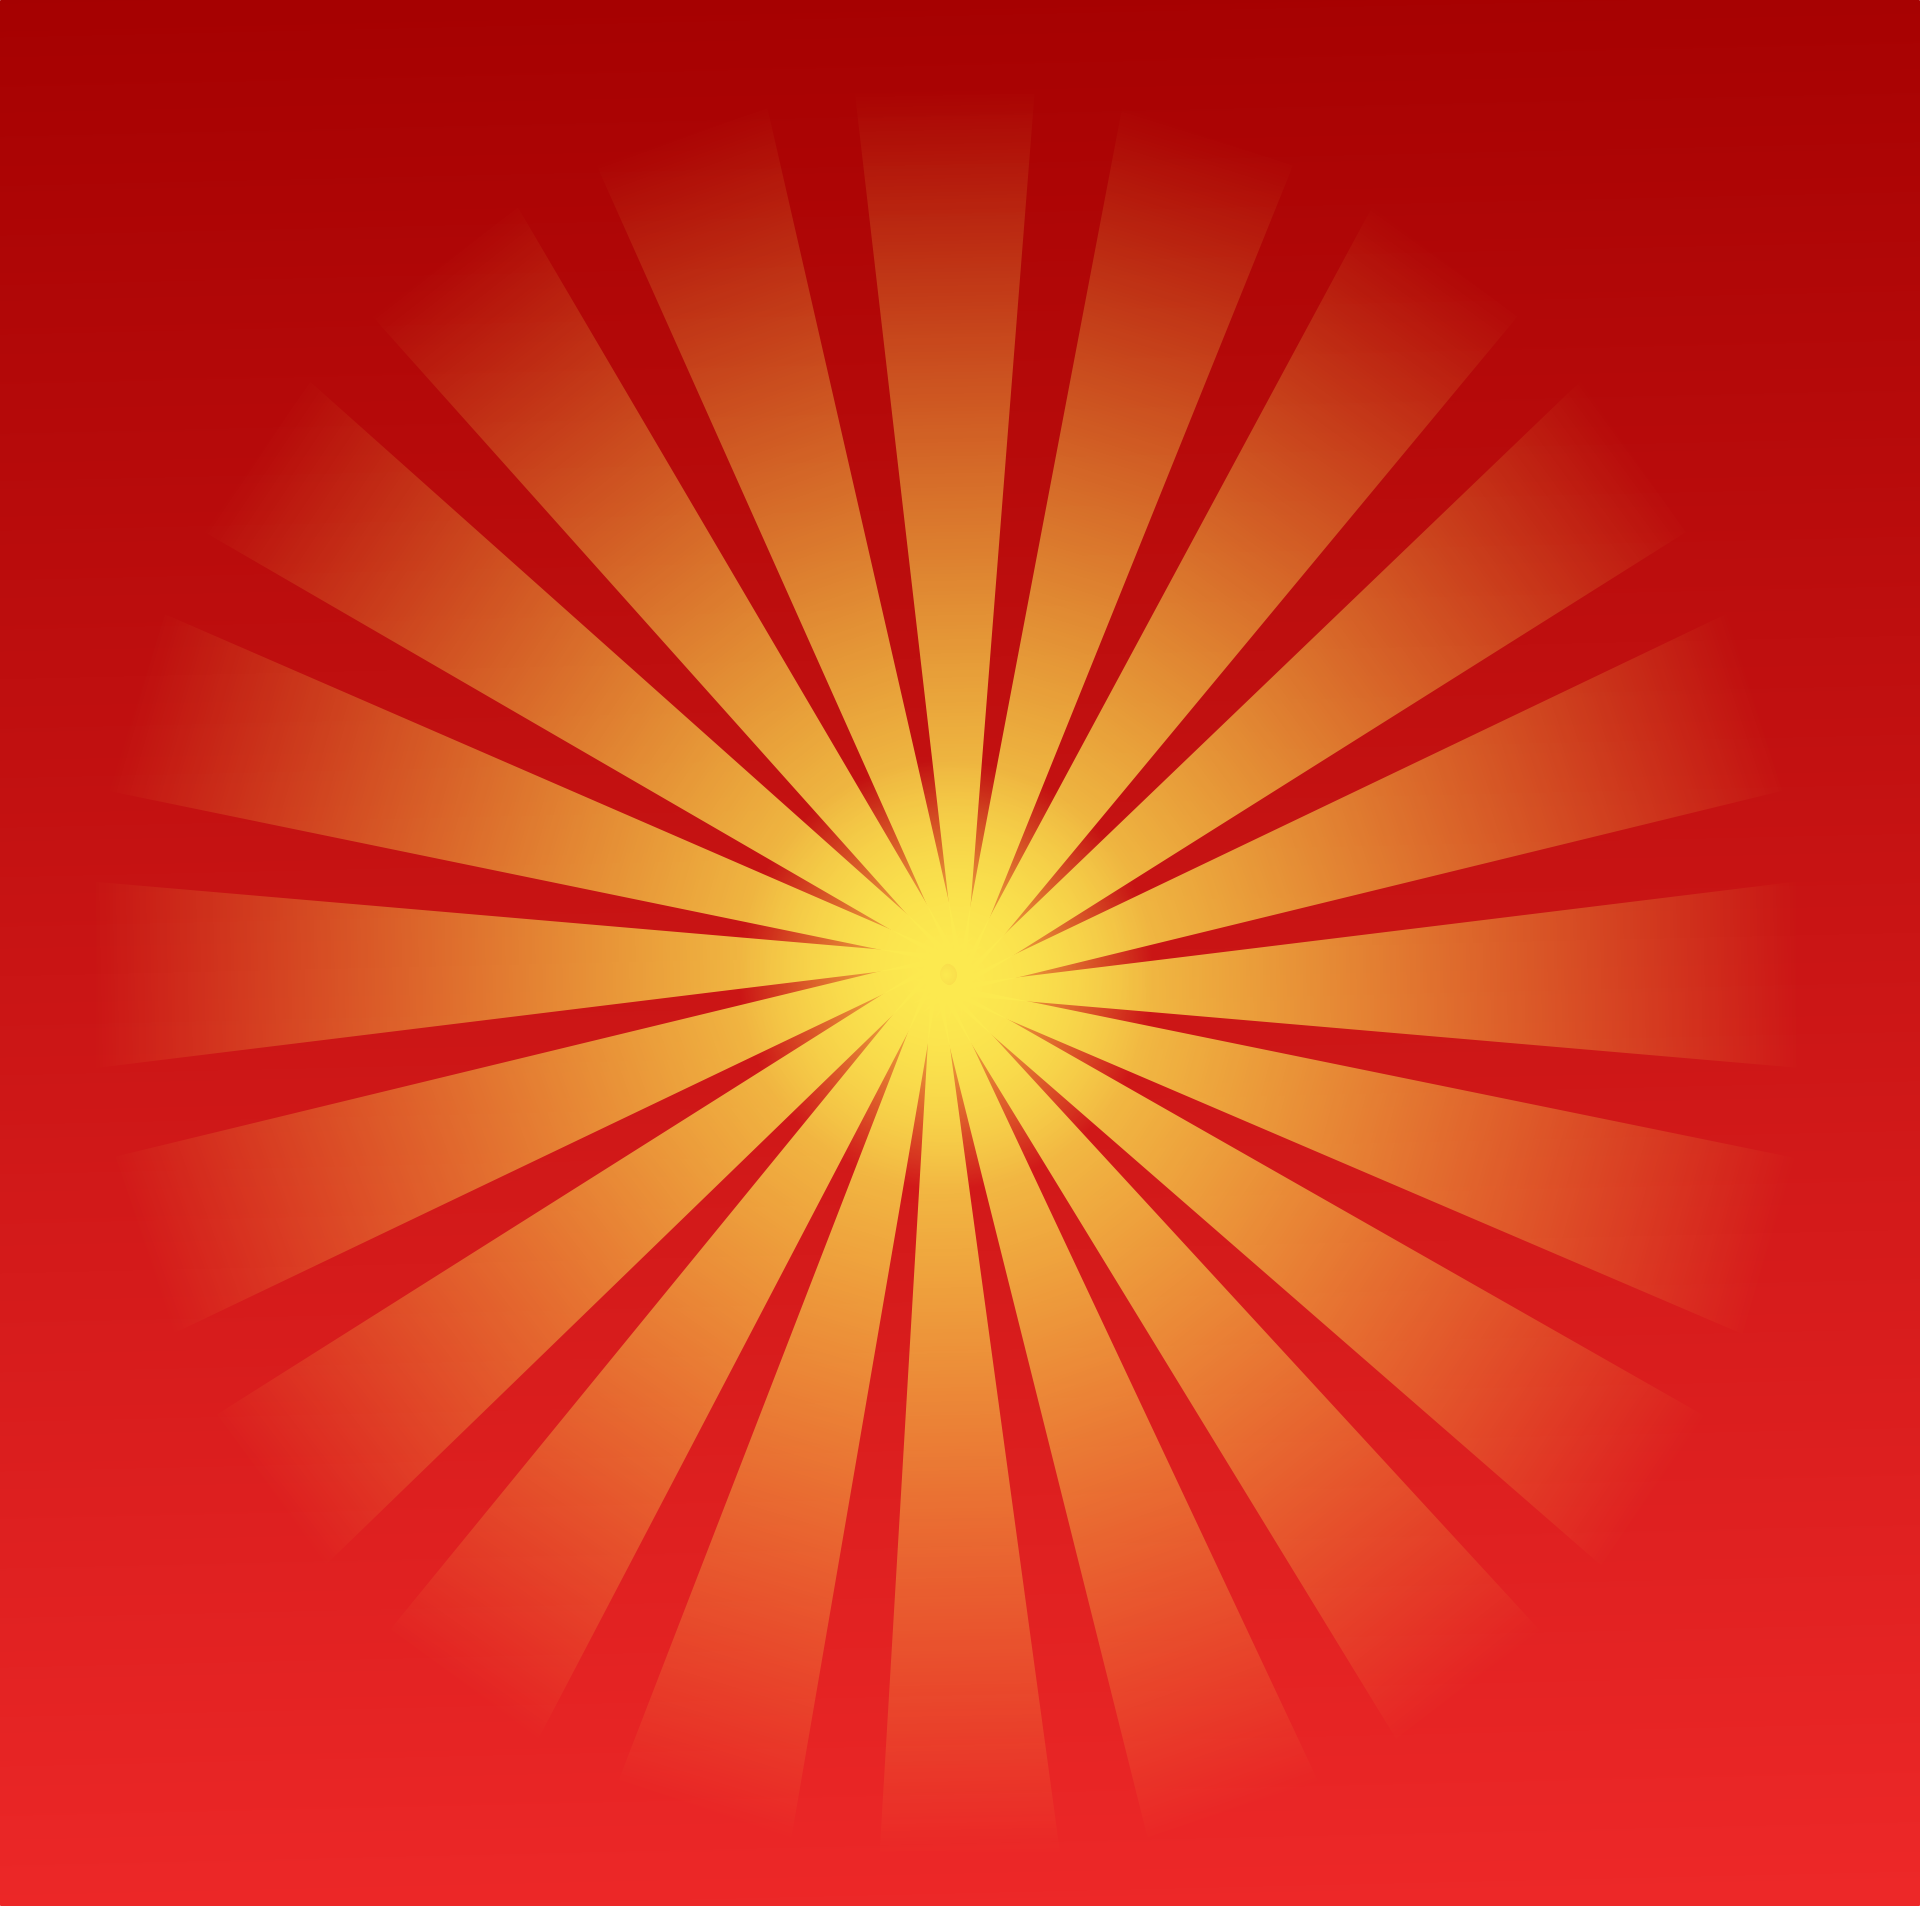 A yellow sun on a red background.